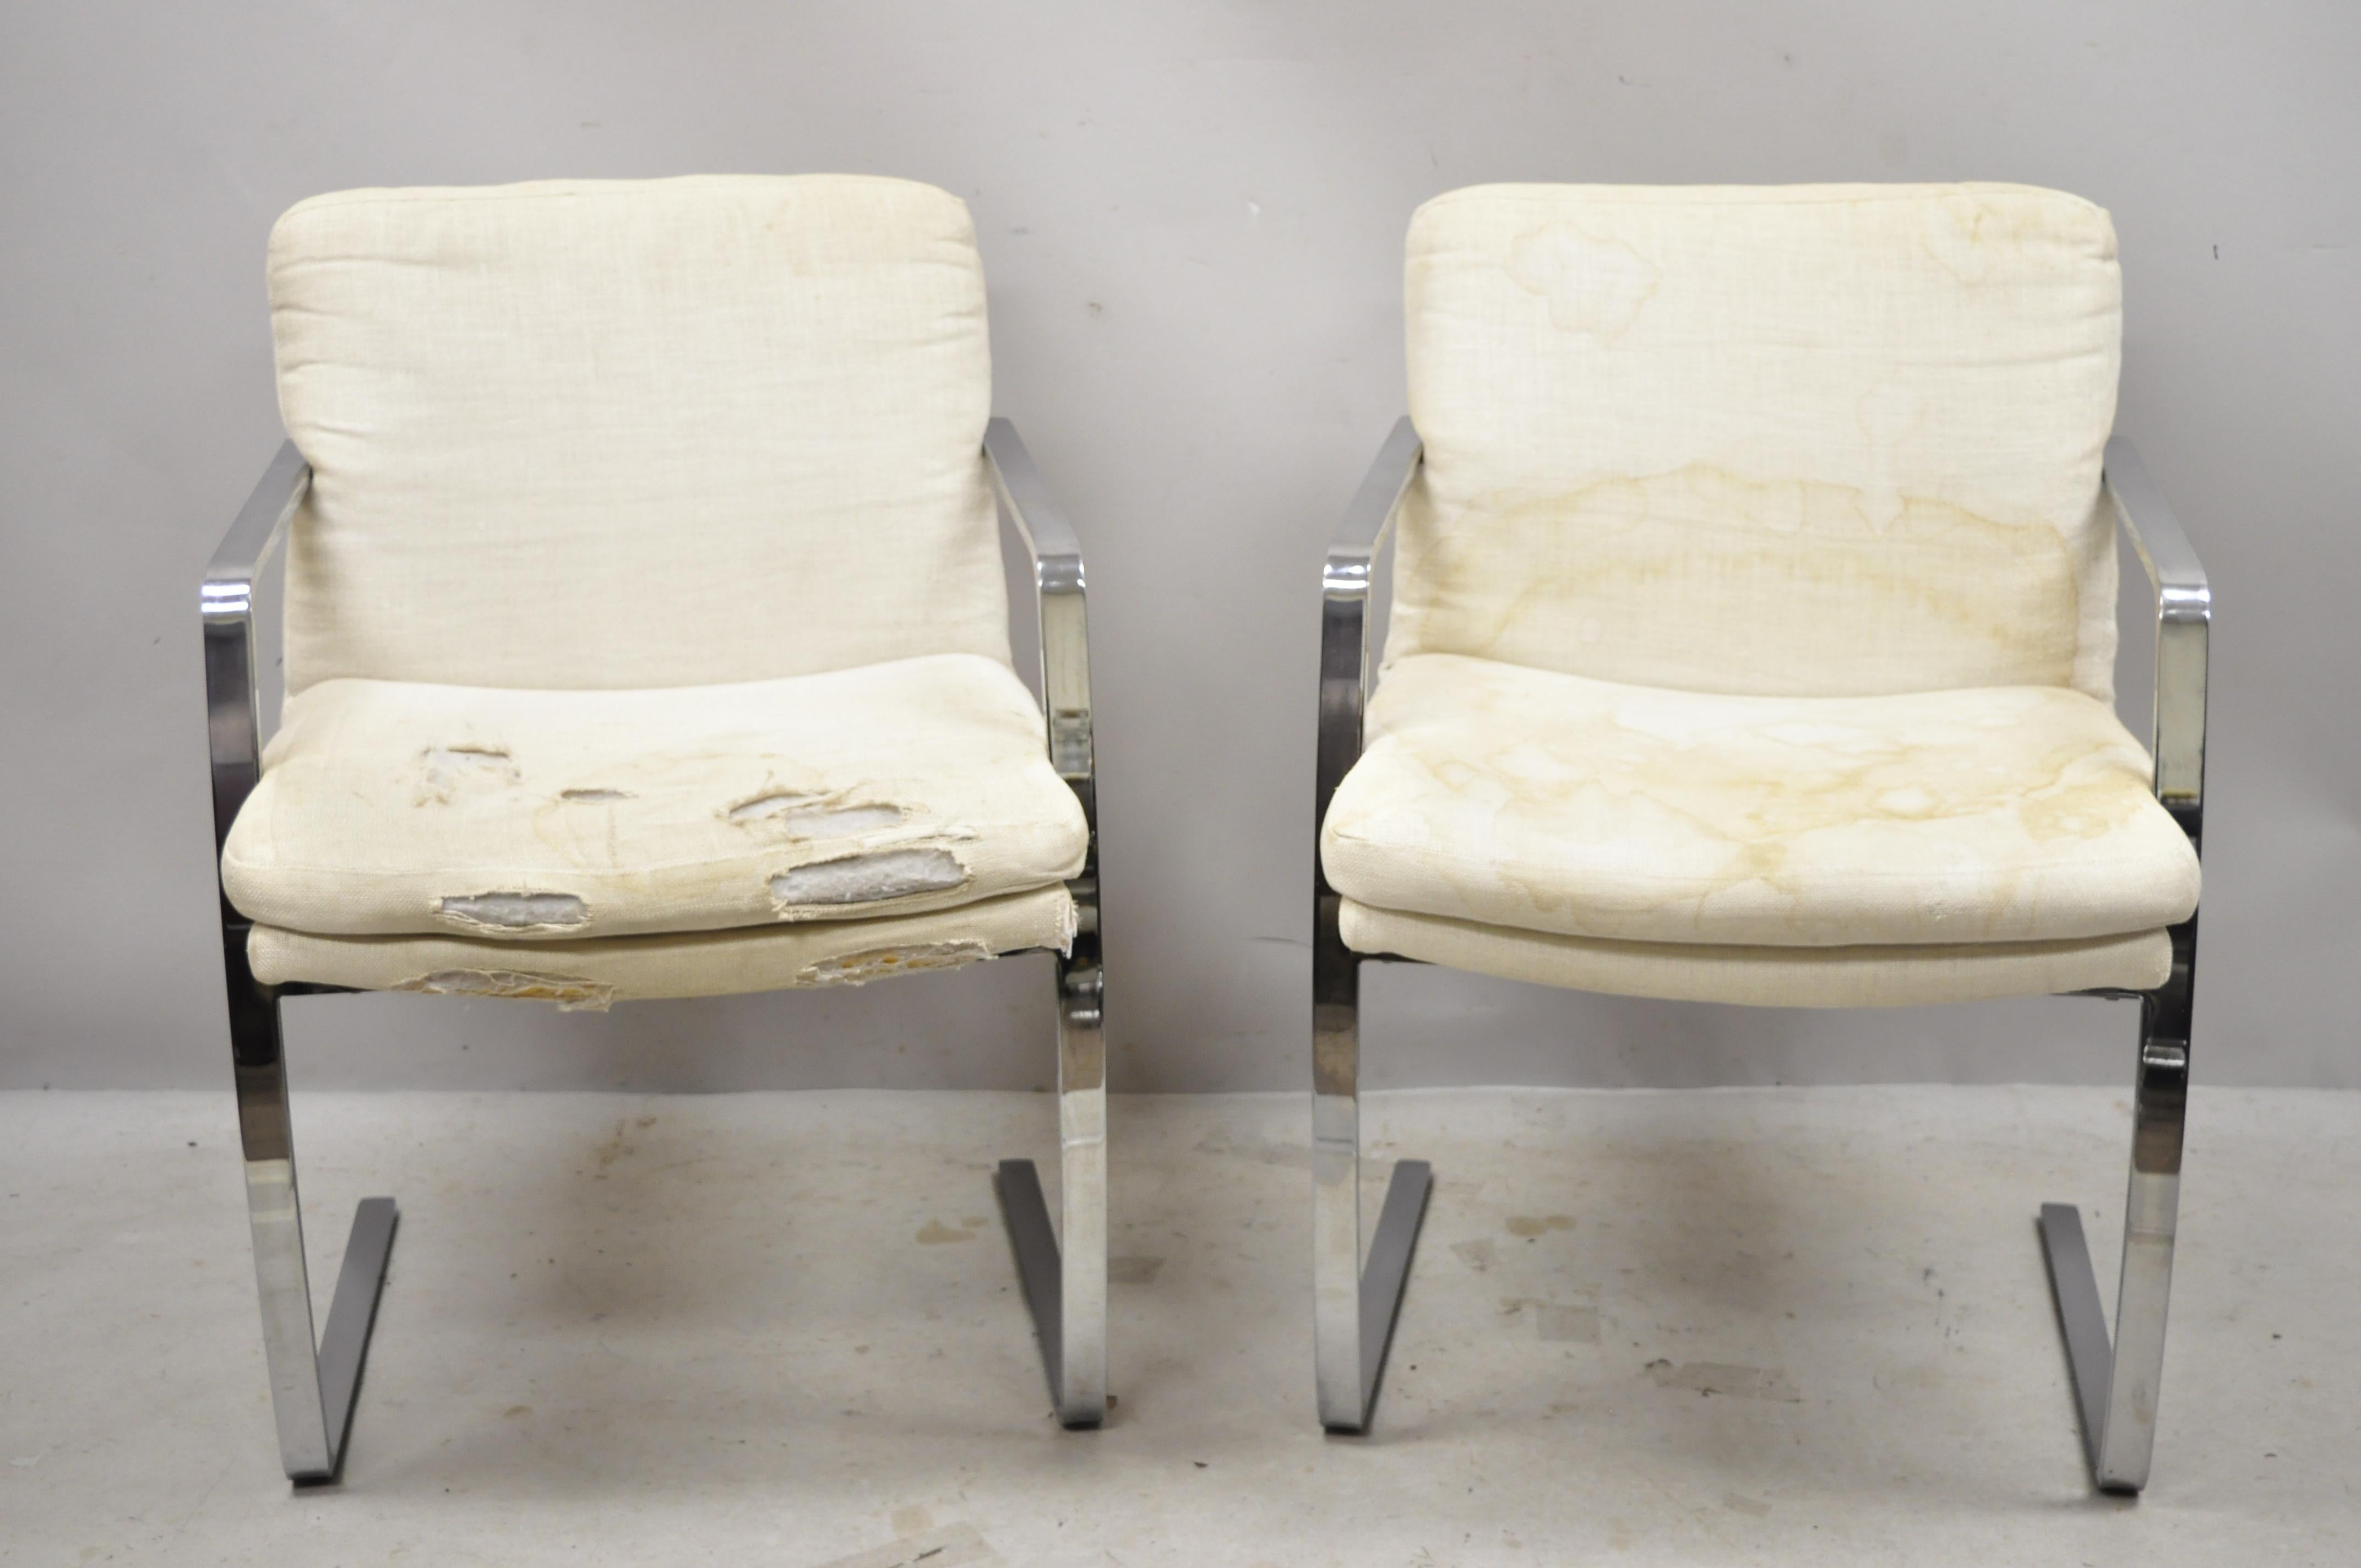 Vintage Mid-Century Modern BRNO style chrome cantilever lounge armchairs (C), a pair. Item features heavy chrome-plated steel cantilever frames, quality American craftsmanship, sleek sculptural form, circa mid to late 20th century. Measurements: 33